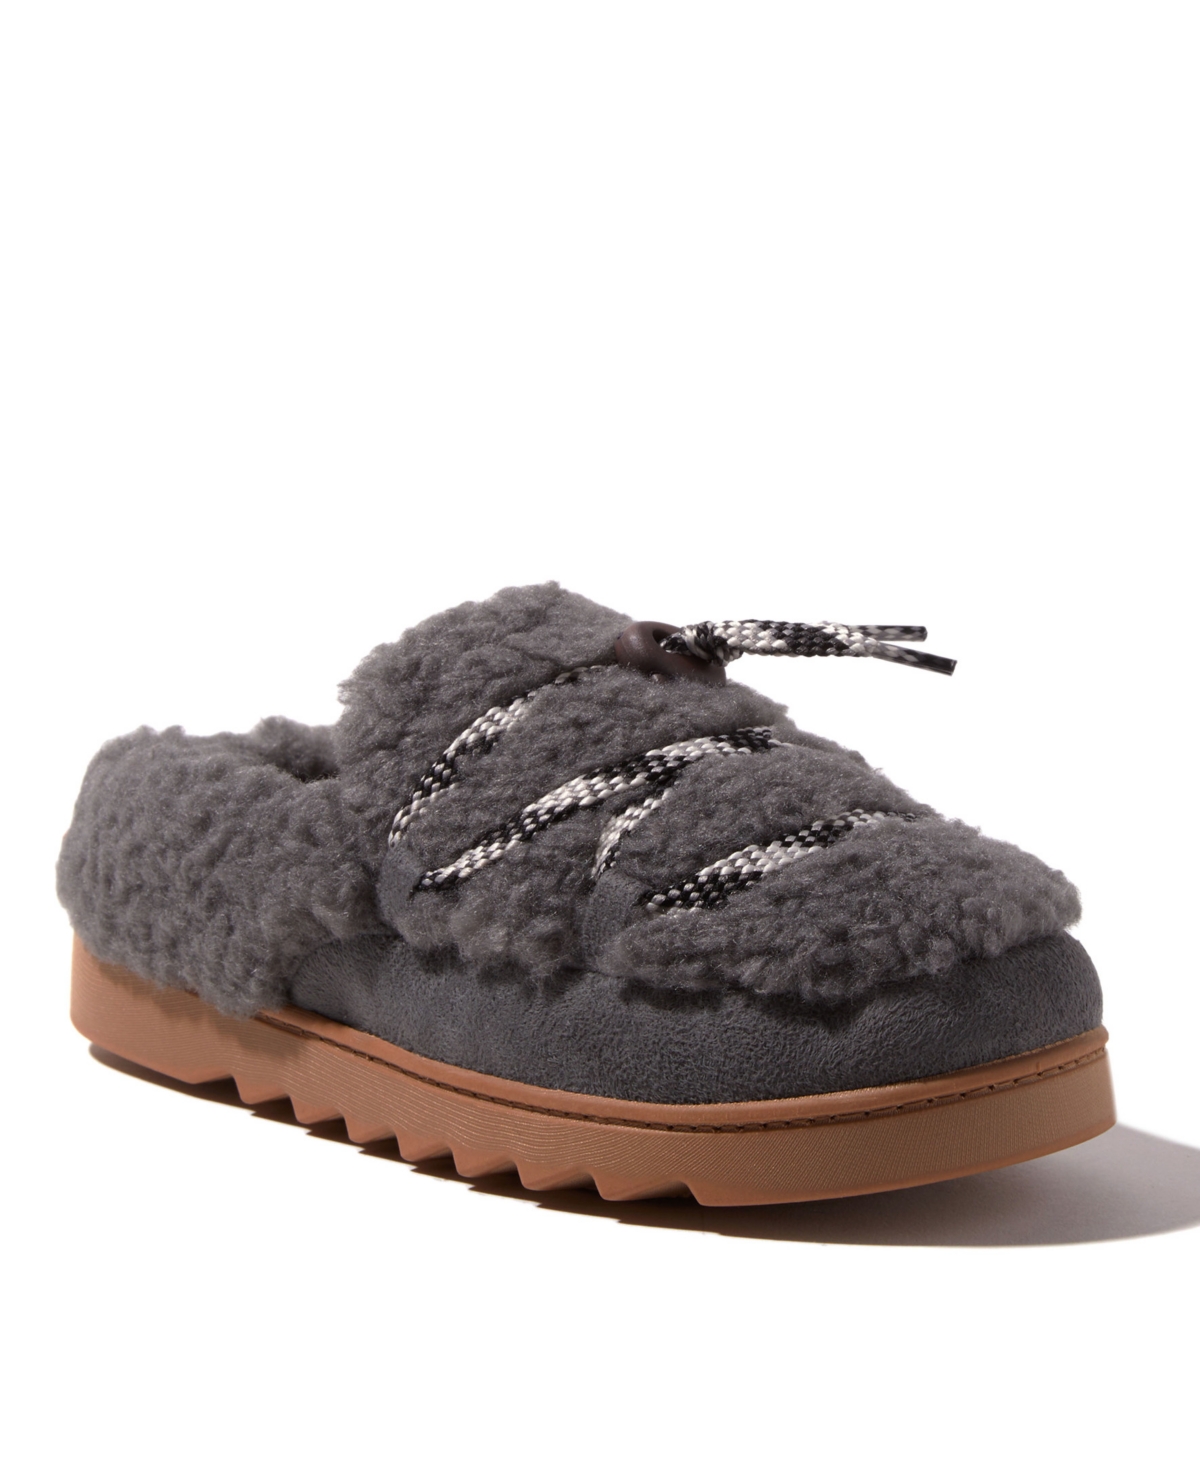 Women's Giselle Lace Up Teddy Mule Slippers - CrÃ¨me Brulee